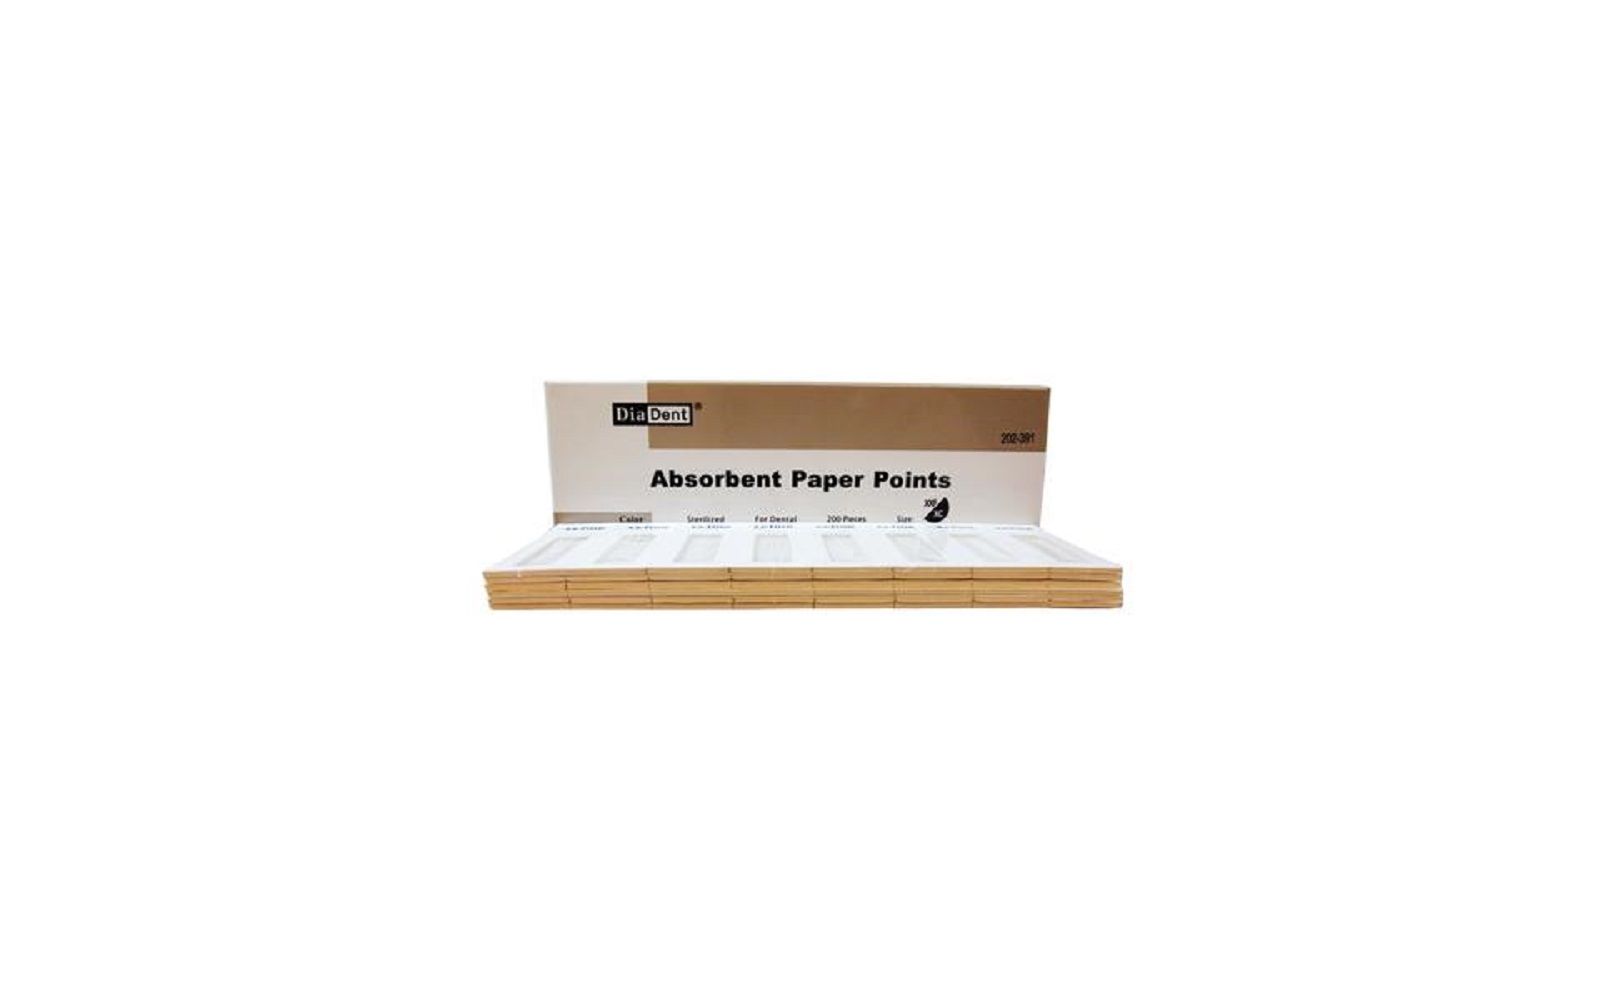 Absorbent paper points – cell pack, accessory sizes, 200/box - diadent manufacturing inc